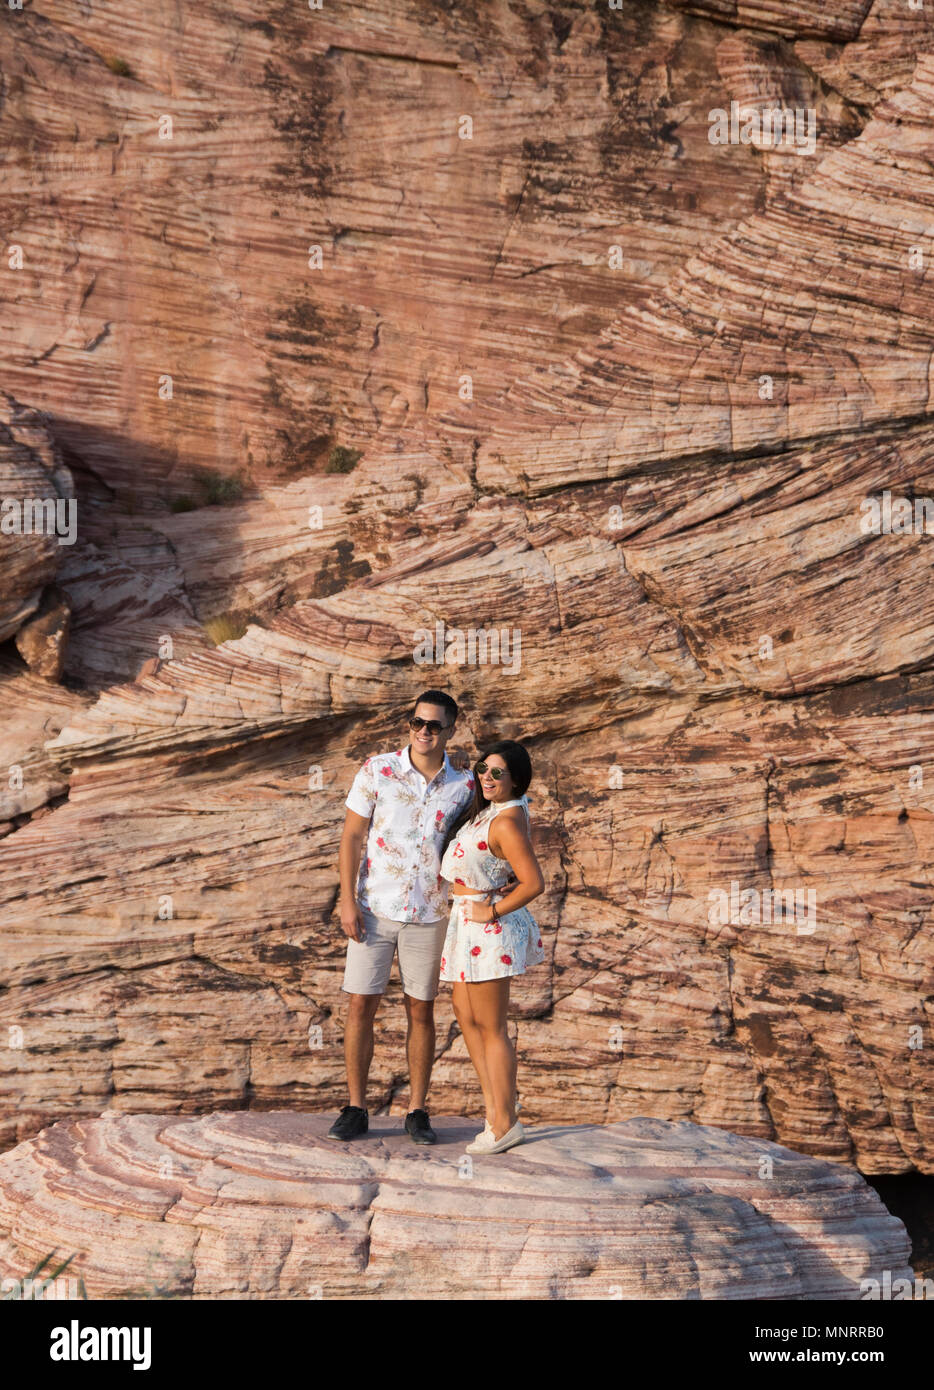 Couple poses in front of cross-bedded sandstone, Calico Hills, Red Rock Canyon National Conservation Area, Las Vegas, Nevada Stock Photo